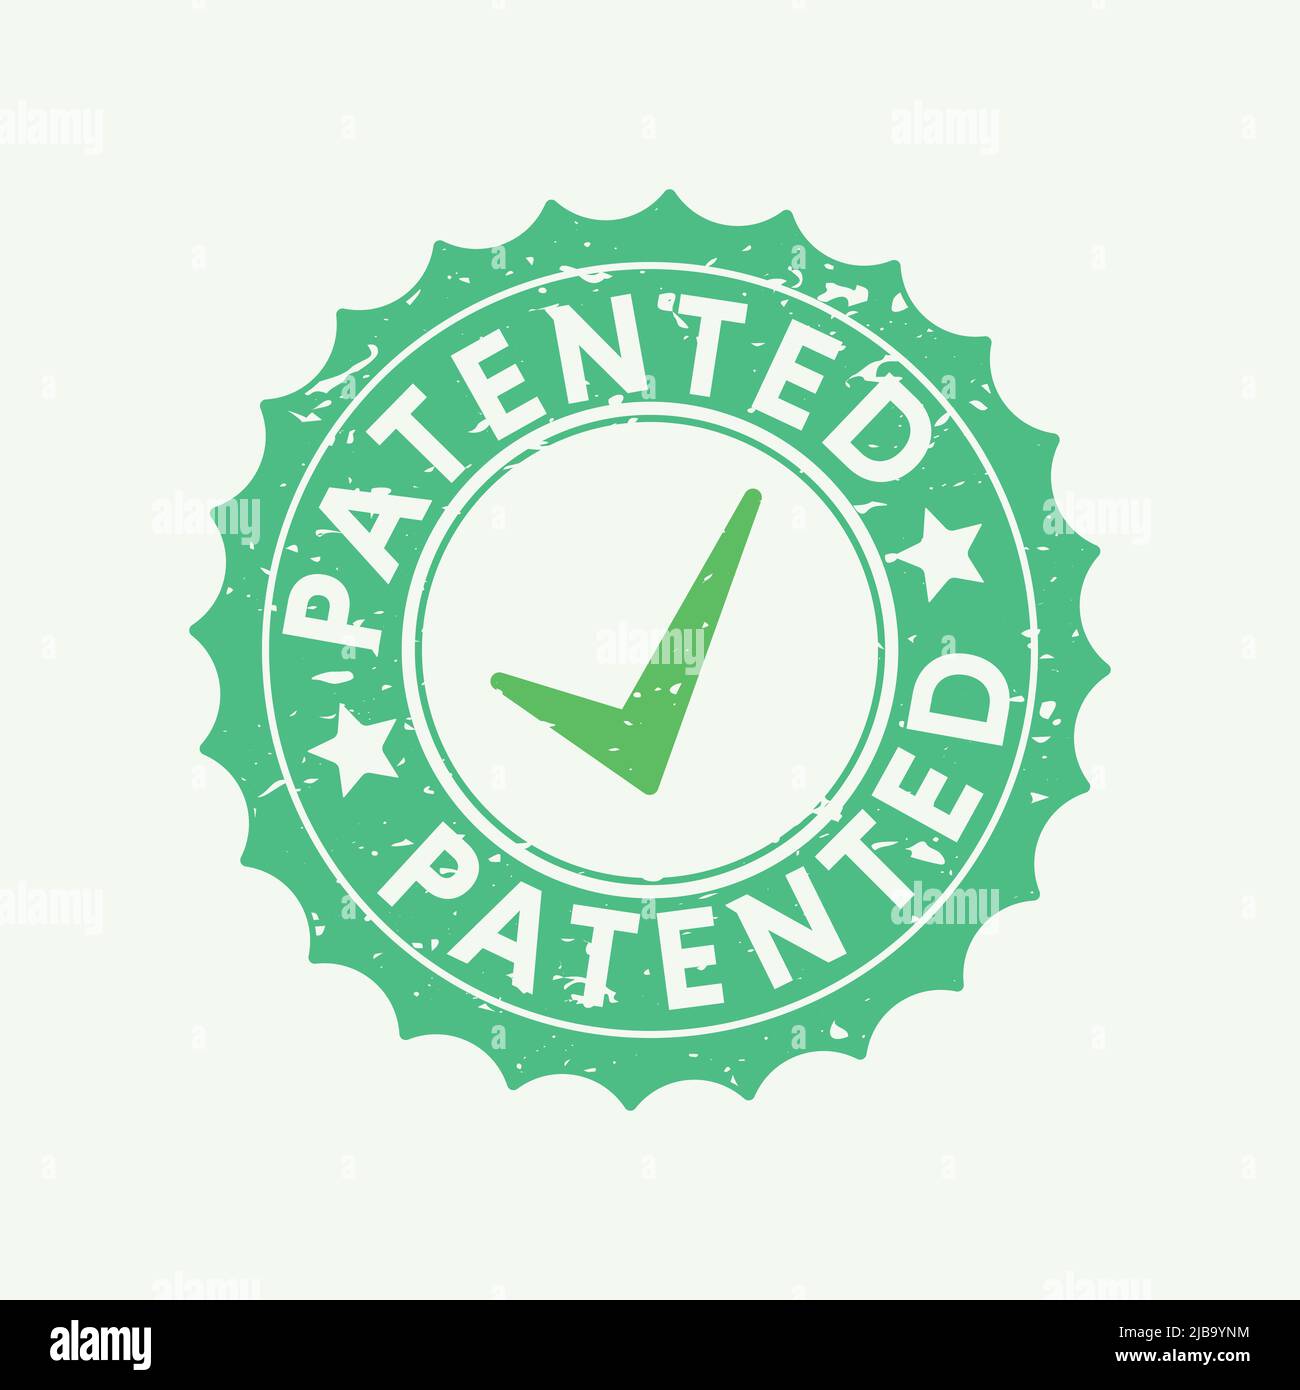 Patented text on round rubber stamp icon isolated on white background Stock Vector